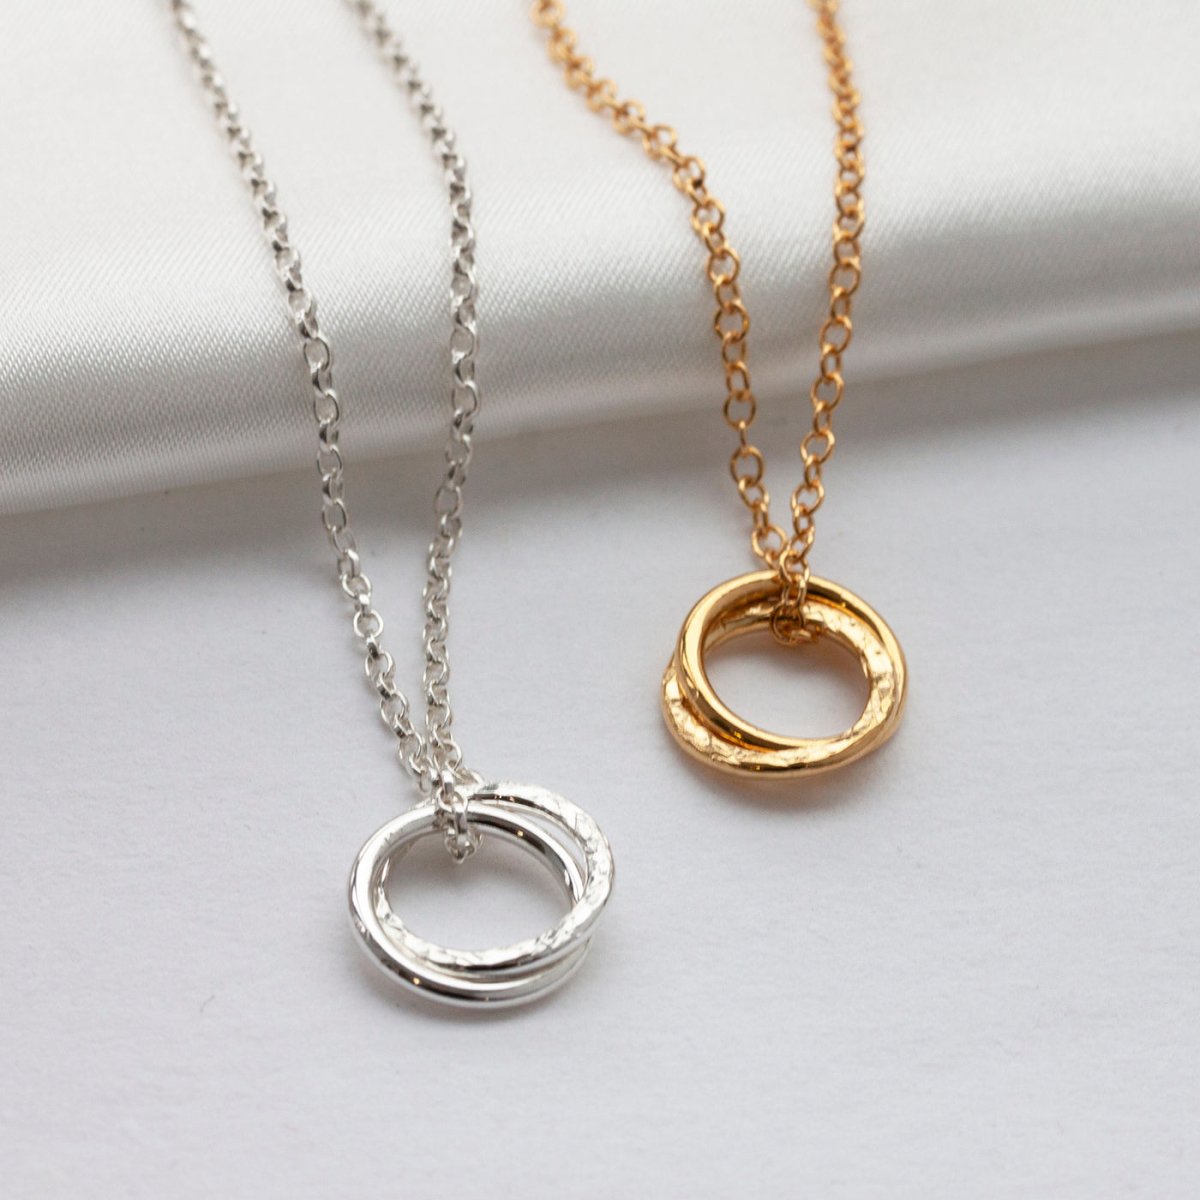 Jewelry Gifts | Balfour